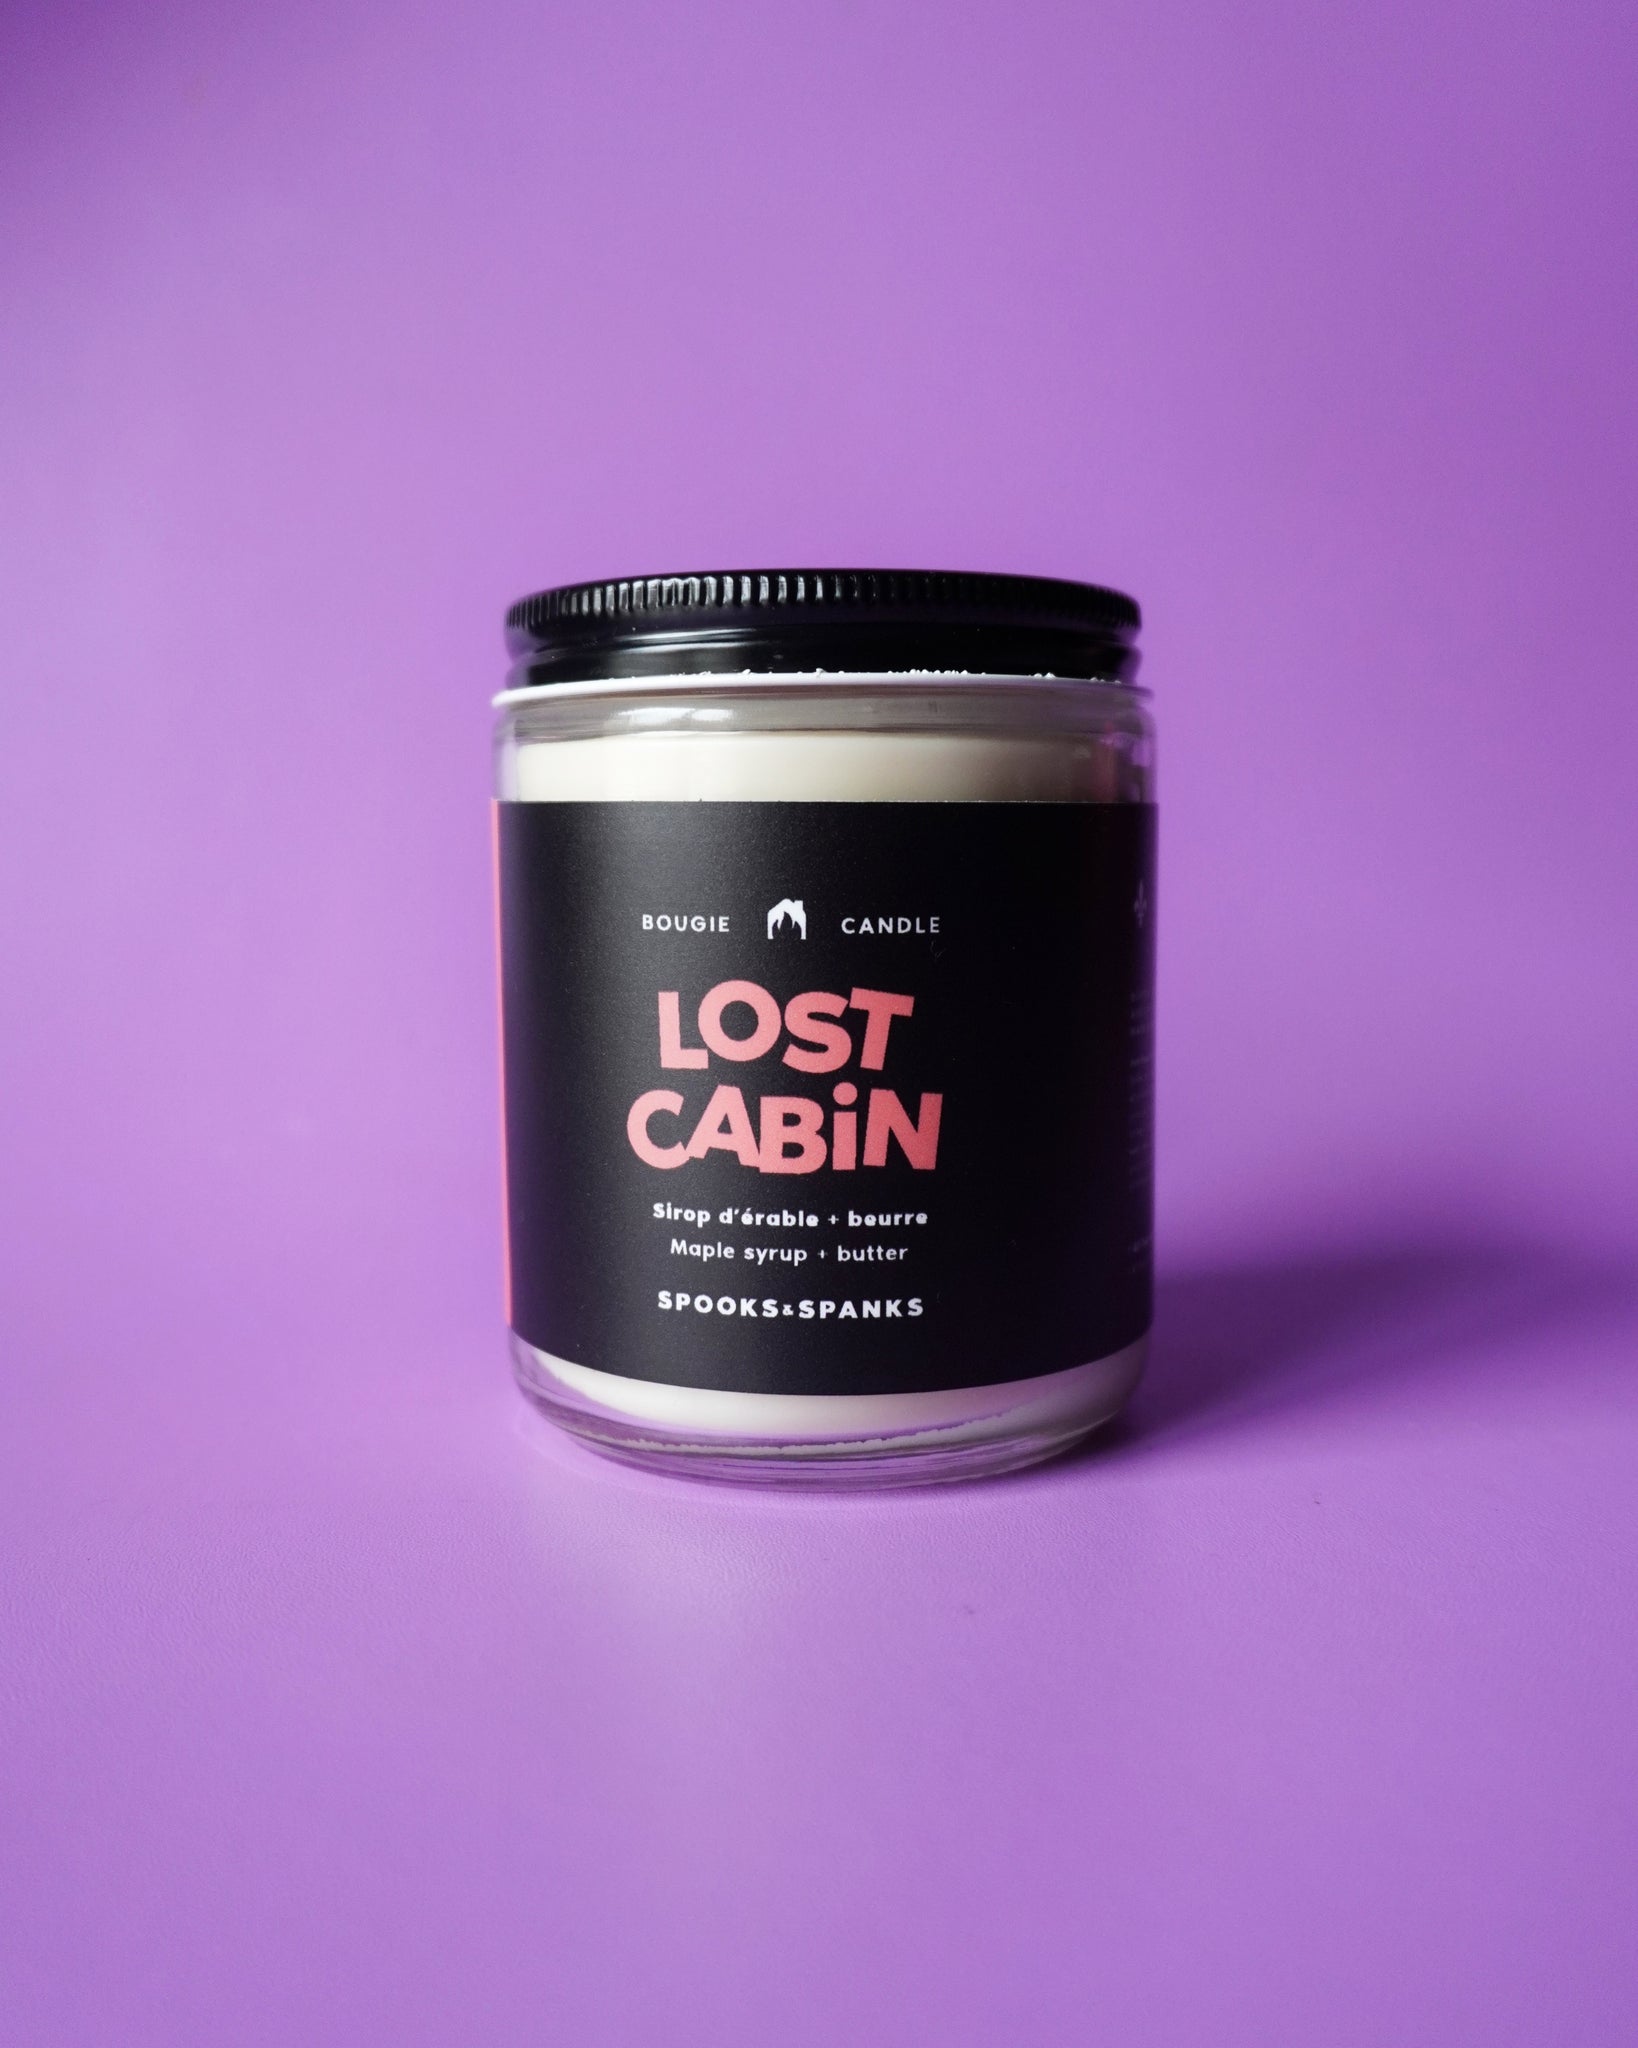 Lost Cabin Maple Syrup + Butter Candle